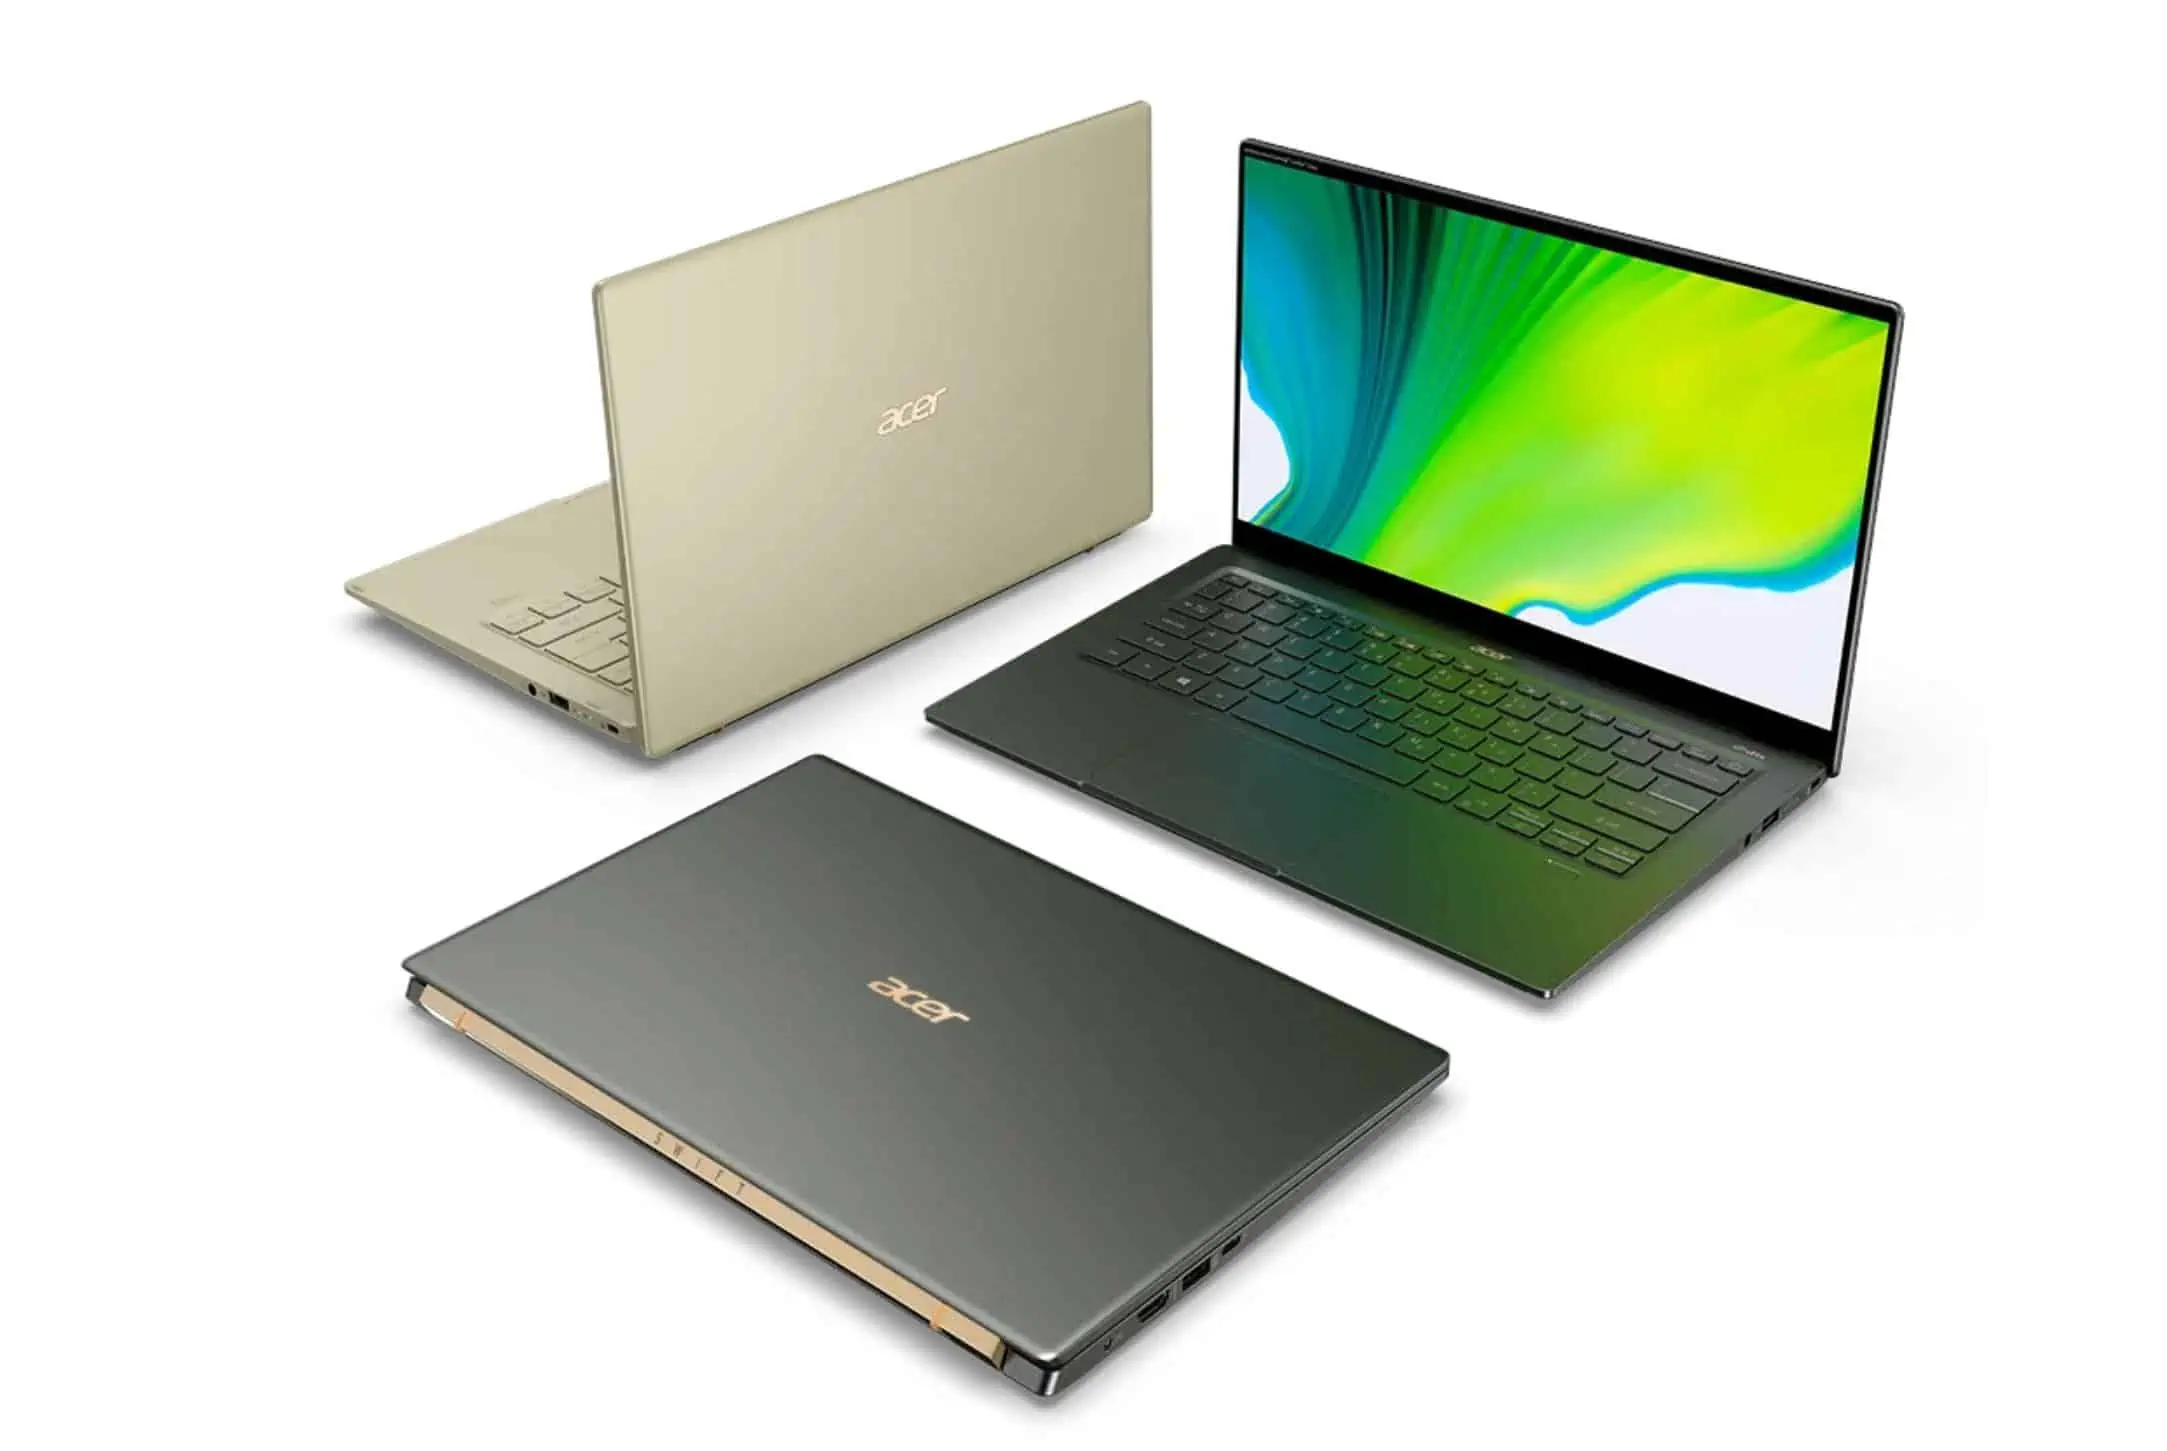 Acer Swift 5 laptop with 11th gen Intel Core processors and antimicrobial touchscreen will be available this year